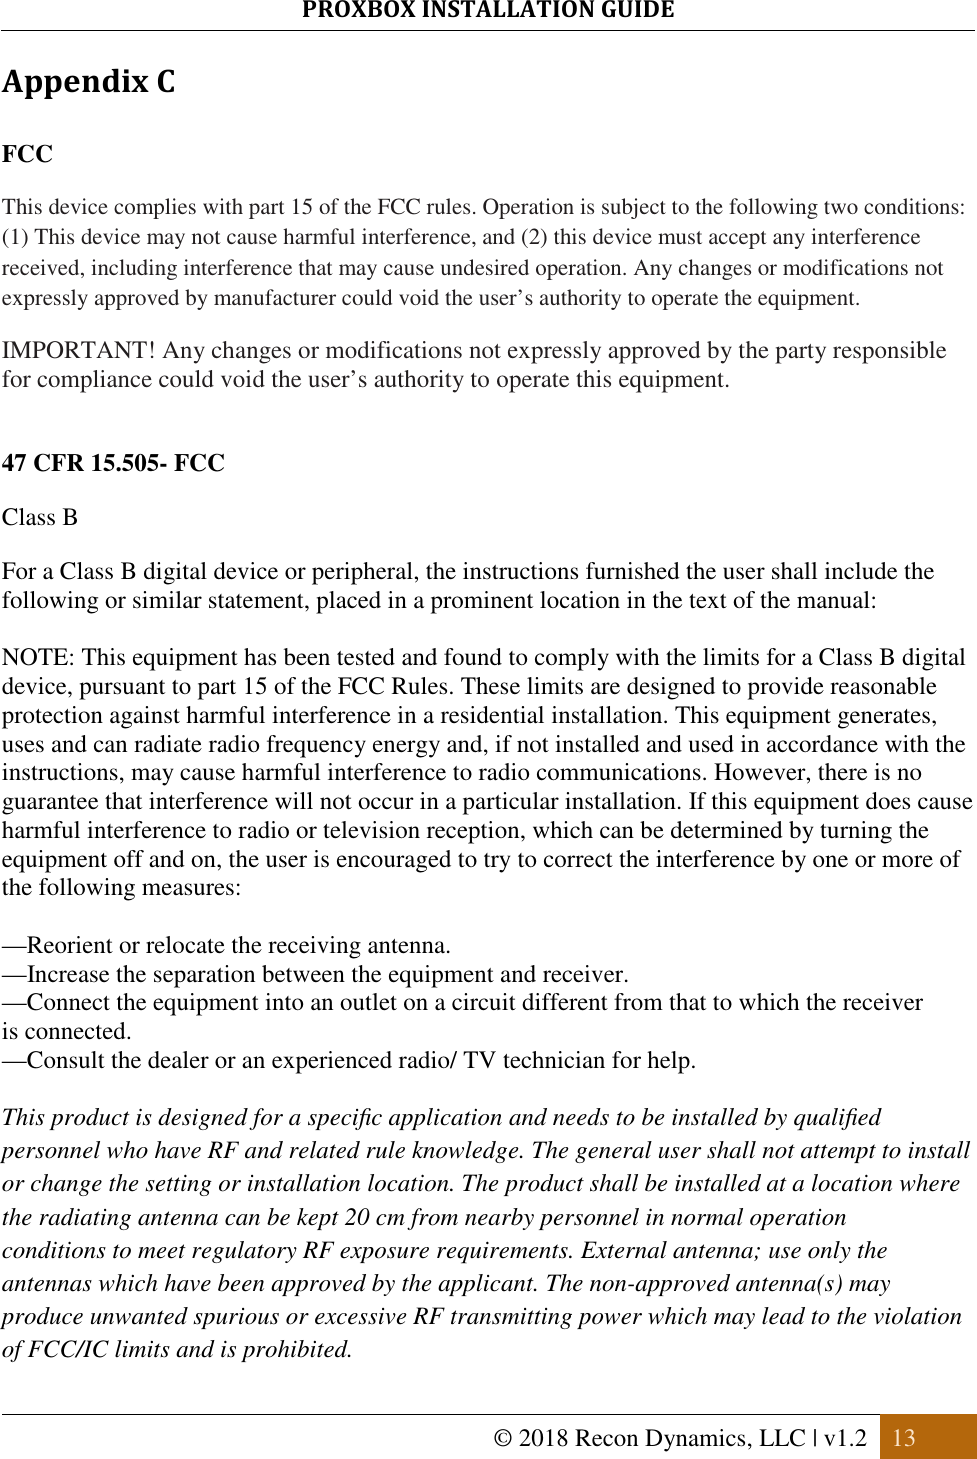 PROXBOX INSTALLATION GUIDE   © 2018 Recon Dynamics, LLC | v1.2  13  Appendix C  FCC This device complies with part 15 of the FCC rules. Operation is subject to the following two conditions: (1) This device may not cause harmful interference, and (2) this device must accept any interference received, including interference that may cause undesired operation. Any changes or modifications not expressly approved by manufacturer could void the user’s authority to operate the equipment.  IMPORTANT! Any changes or modifications not expressly approved by the party responsible for compliance could void the user’s authority to operate this equipment.   47 CFR 15.505- FCC Class B For a Class B digital device or peripheral, the instructions furnished the user shall include the following or similar statement, placed in a prominent location in the text of the manual:  NOTE: This equipment has been tested and found to comply with the limits for a Class B digital device, pursuant to part 15 of the FCC Rules. These limits are designed to provide reasonable protection against harmful interference in a residential installation. This equipment generates, uses and can radiate radio frequency energy and, if not installed and used in accordance with the instructions, may cause harmful interference to radio communications. However, there is no guarantee that interference will not occur in a particular installation. If this equipment does cause harmful interference to radio or television reception, which can be determined by turning the equipment off and on, the user is encouraged to try to correct the interference by one or more of the following measures:  —Reorient or relocate the receiving antenna. —Increase the separation between the equipment and receiver. —Connect the equipment into an outlet on a circuit different from that to which the receiver is connected. —Consult the dealer or an experienced radio/ TV technician for help.  This product is designed for a speciﬁc application and needs to be installed by qualiﬁed personnel who have RF and related rule knowledge. The general user shall not attempt to install or change the setting or installation location. The product shall be installed at a location where the radiating antenna can be kept 20 cm from nearby personnel in normal operation conditions to meet regulatory RF exposure requirements. External antenna; use only the antennas which have been approved by the applicant. The non-approved antenna(s) may produce unwanted spurious or excessive RF transmitting power which may lead to the violation of FCC/IC limits and is prohibited. 